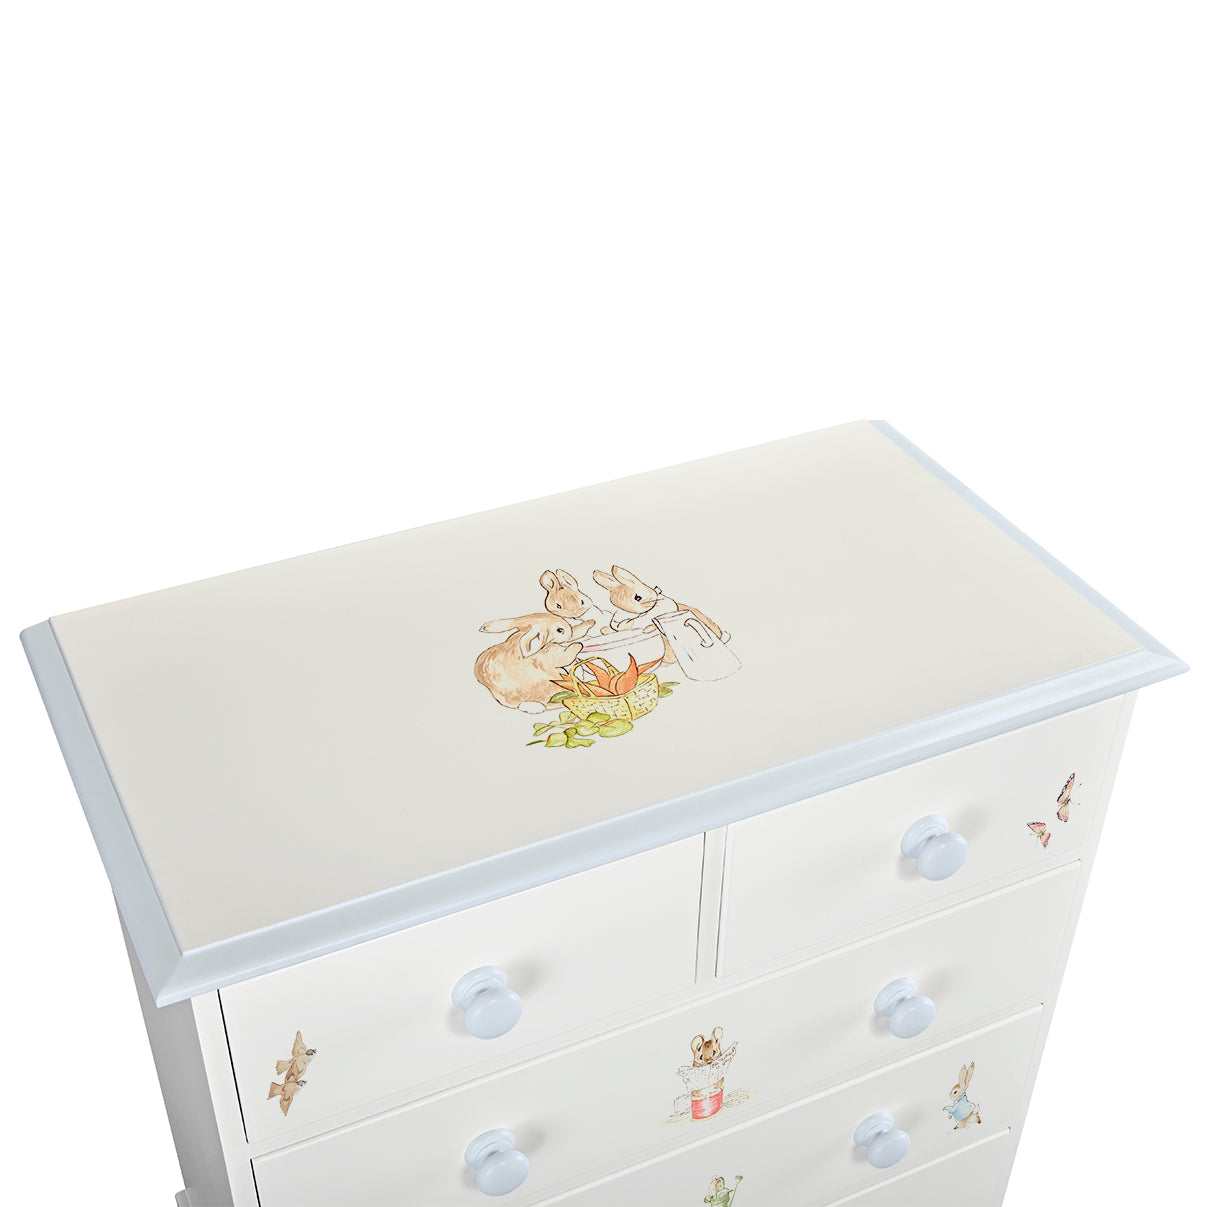 Large Chest of Drawers - Beatrix Potter with Blissful Blue Trim